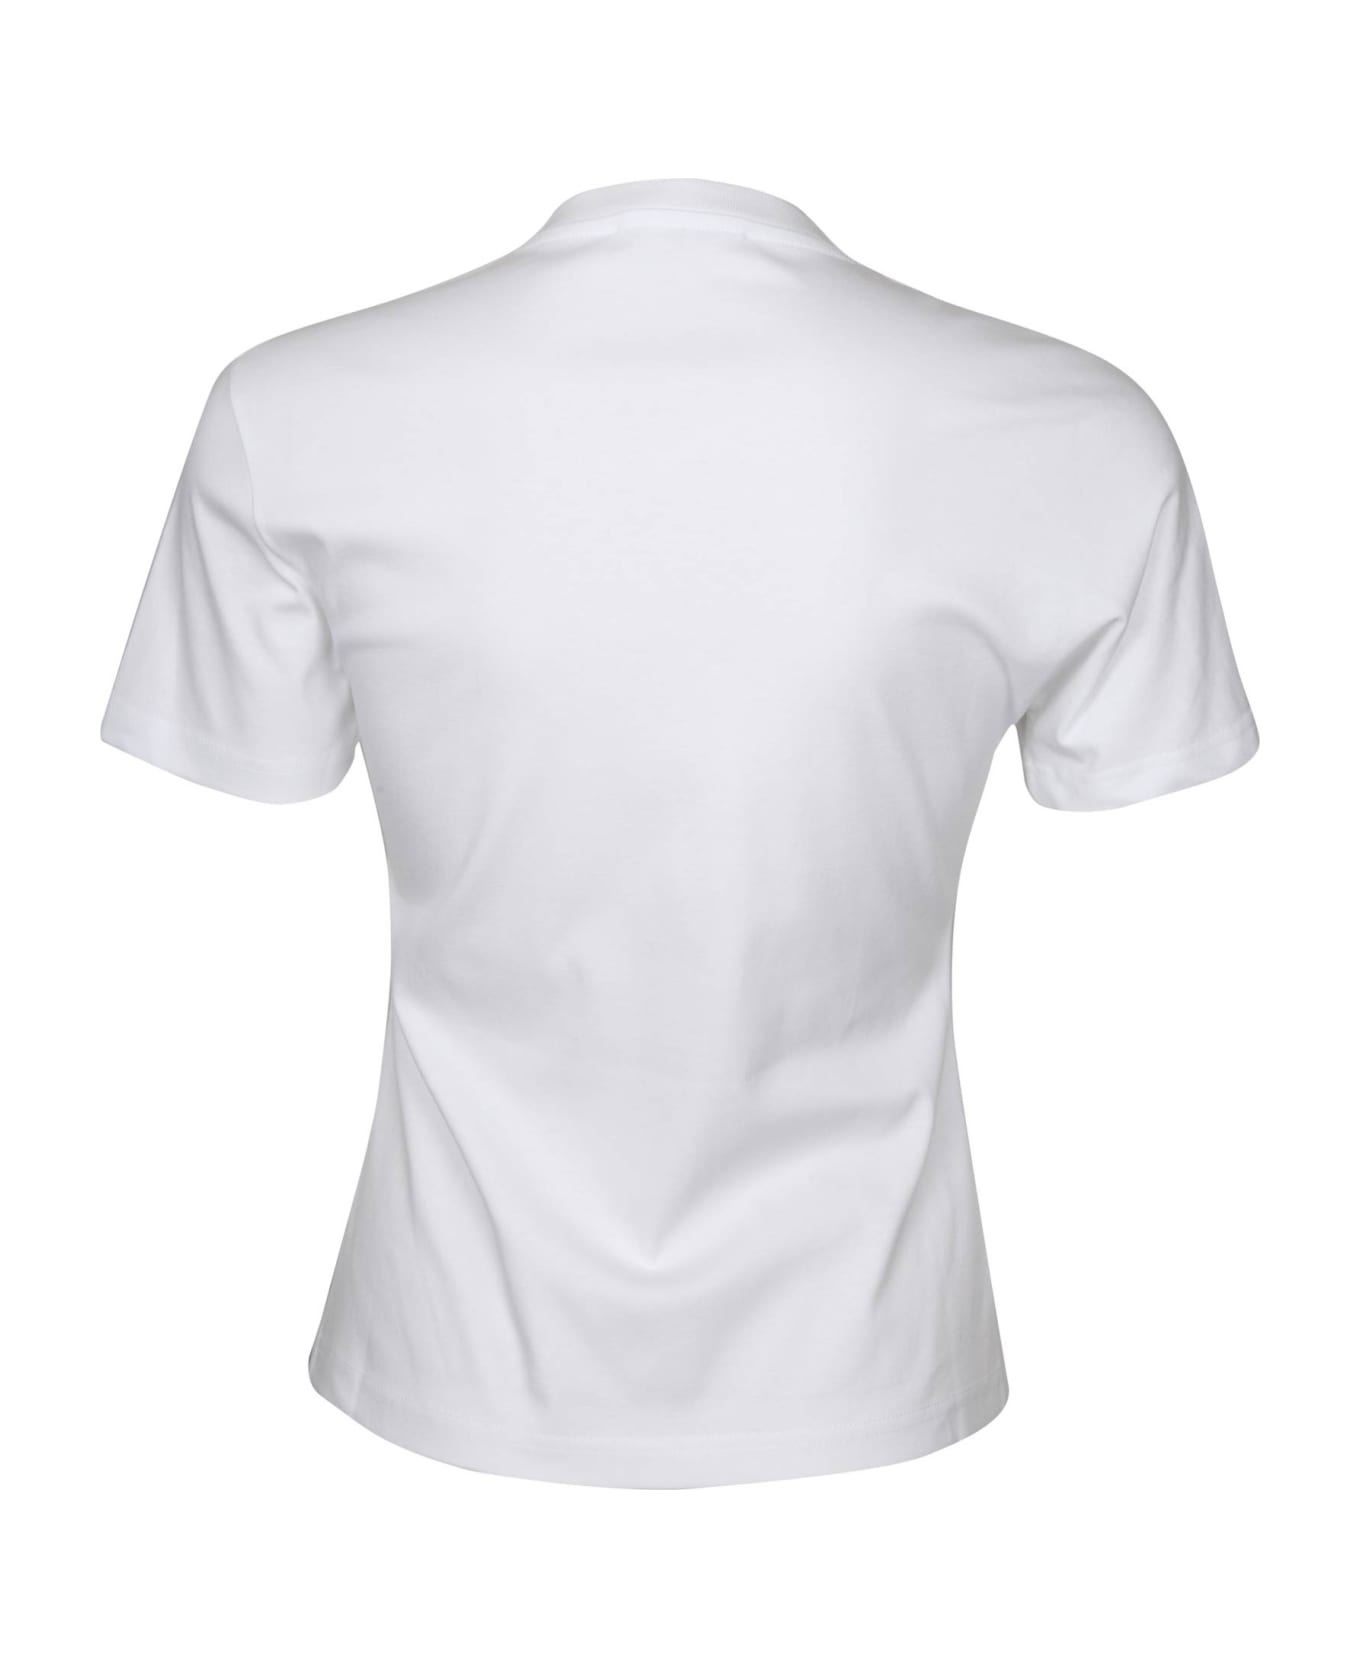 Lanvin Fitted Top In White Cotton - Optic White Tシャツ